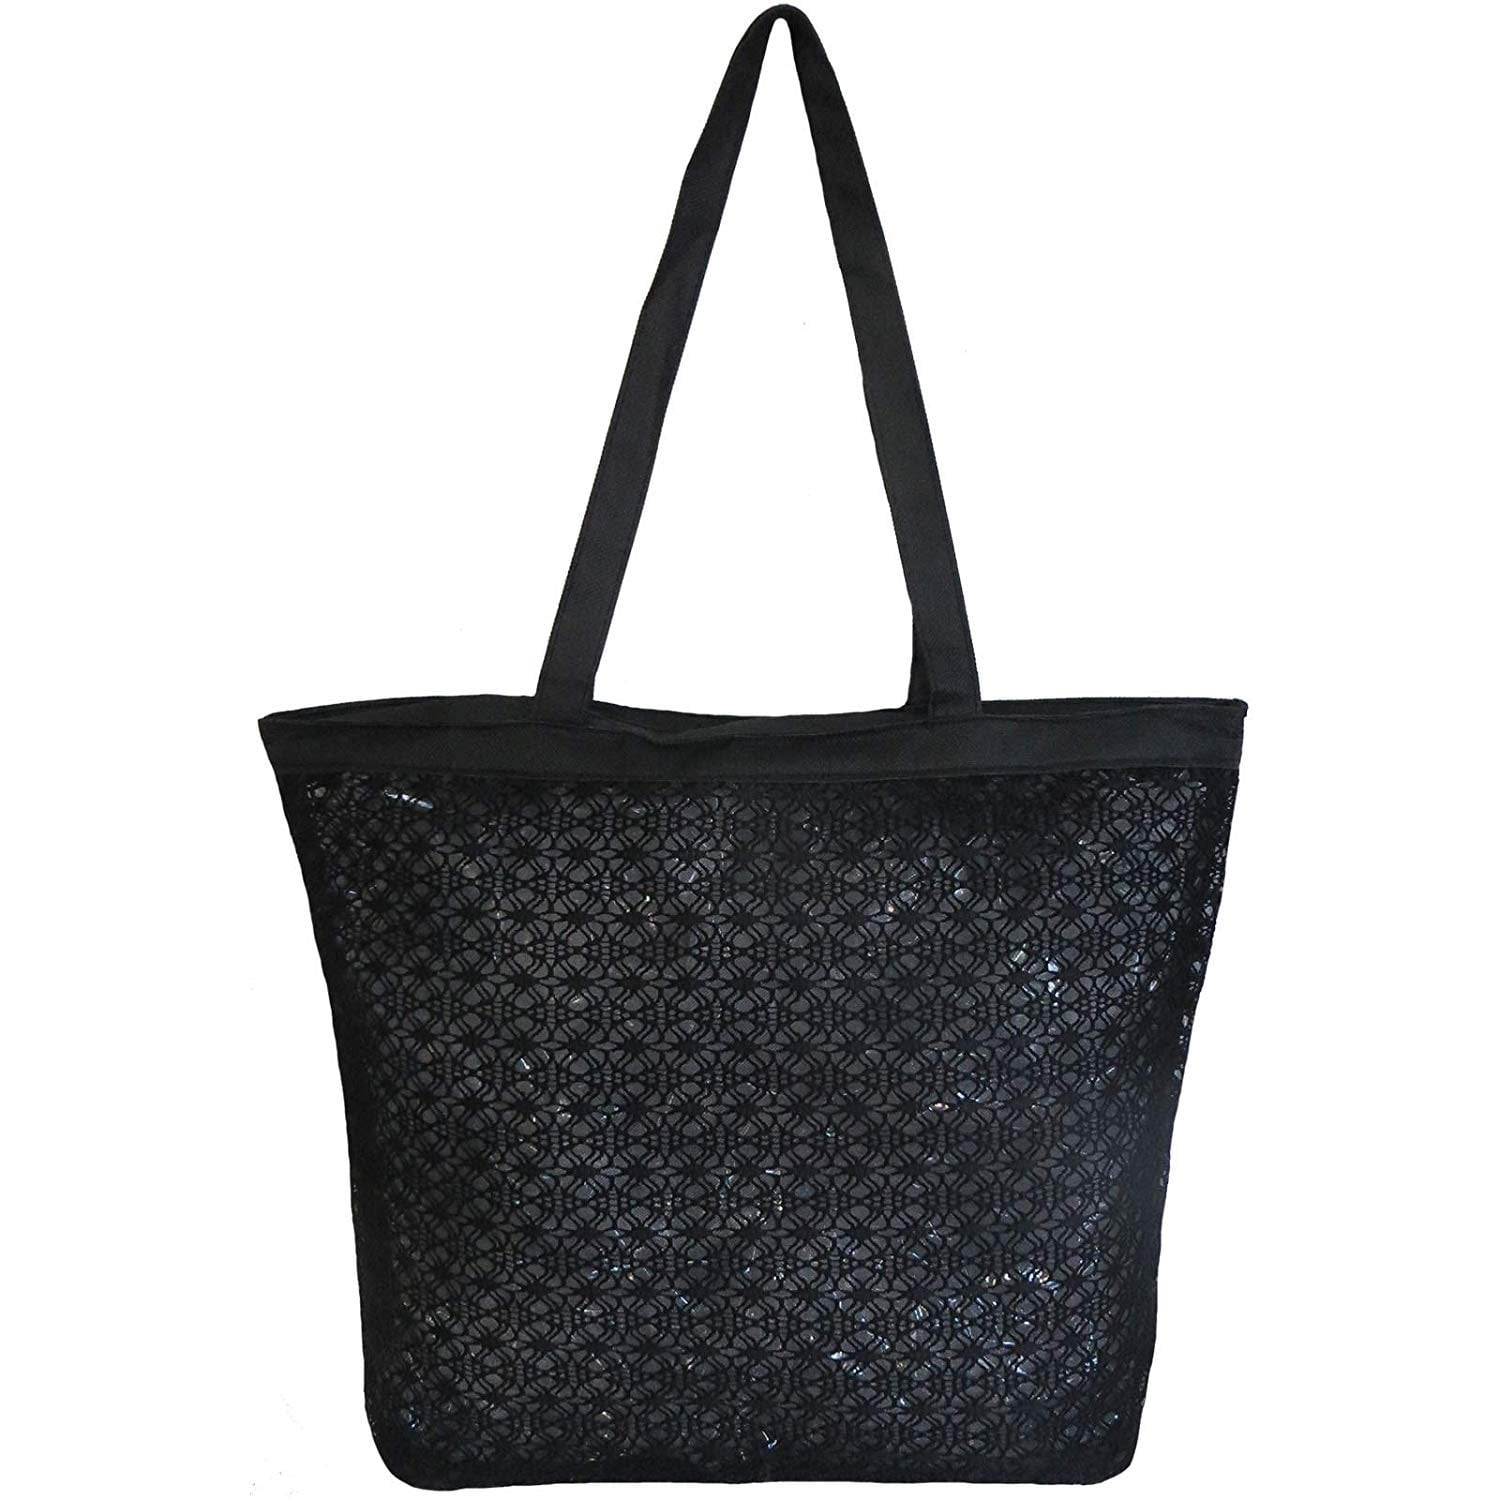 Zipper Top Embroidered Mesh Beach Bag | Lightweight Market, Grocery & Picnic Tote (Black ...